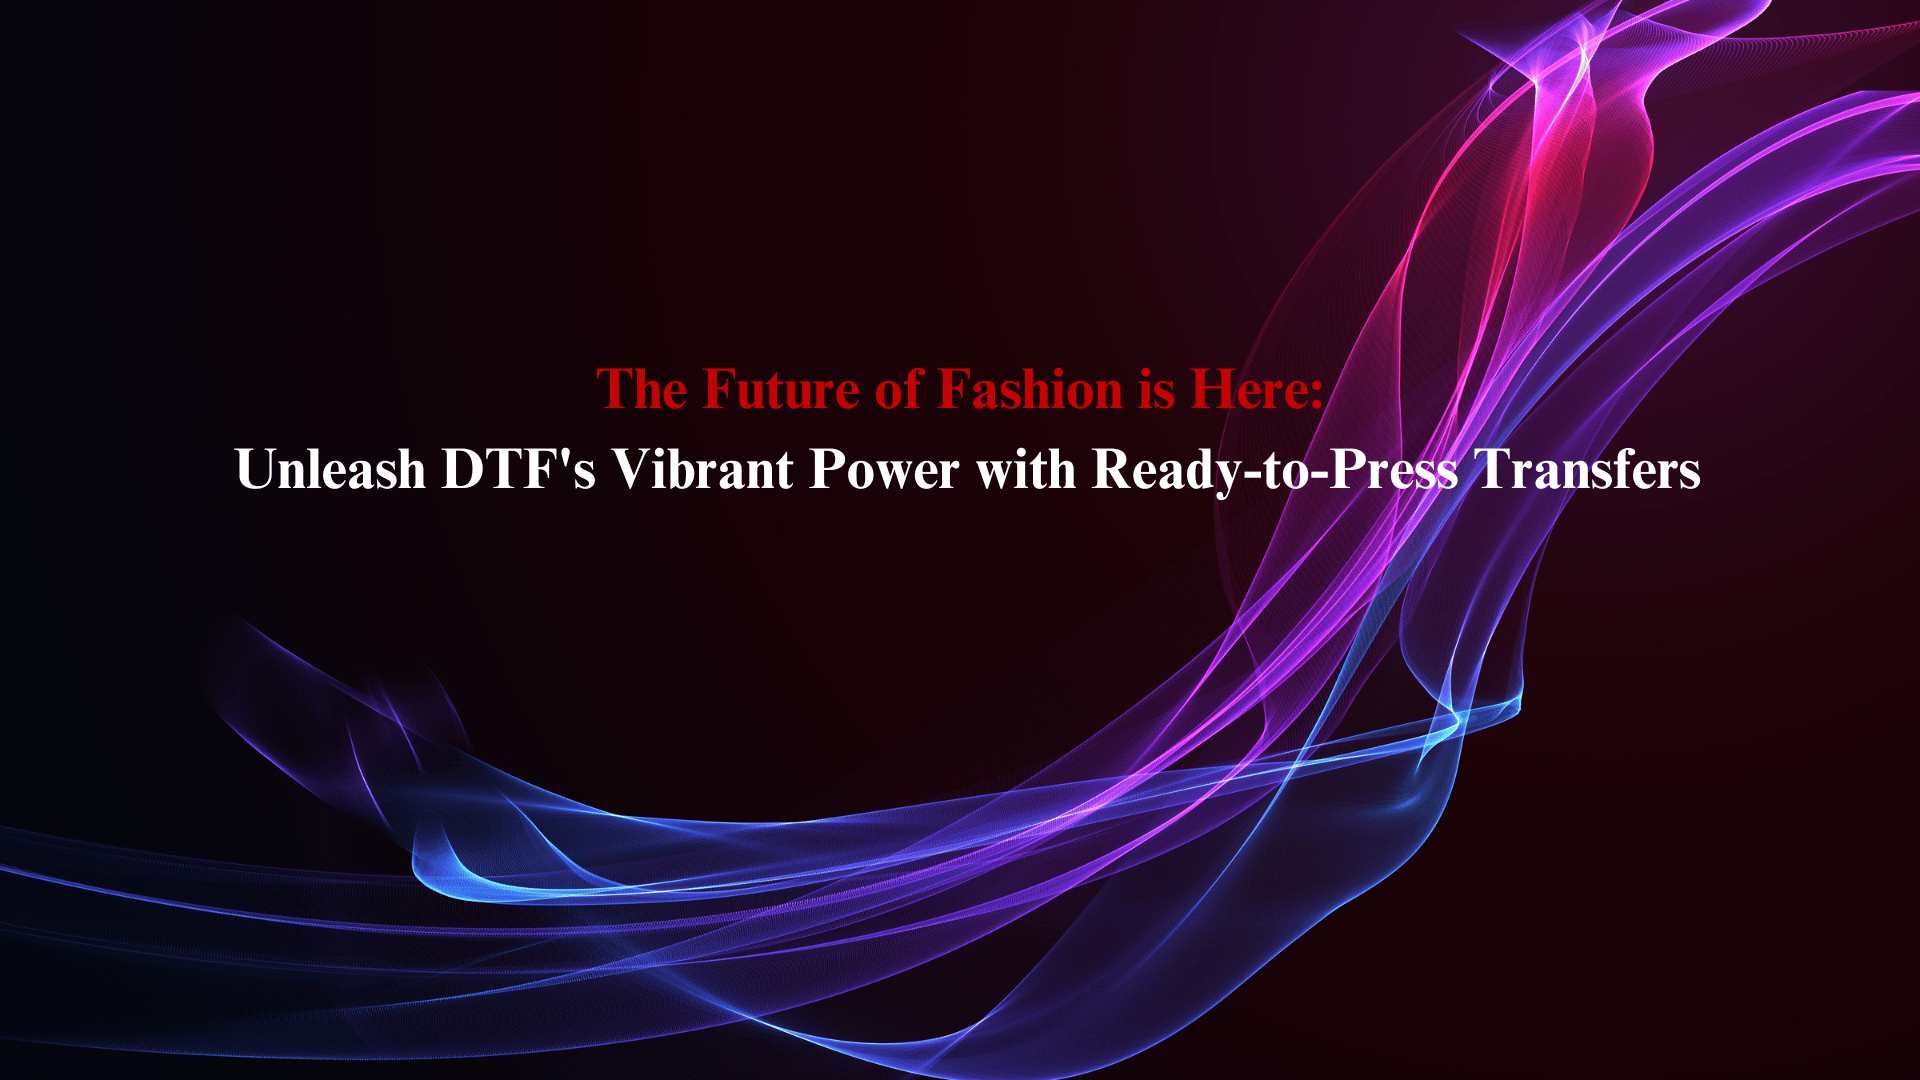 The Future of Fashion is Here: Unleash DTF's Vibrant Power with Ready-to-Press Transfers